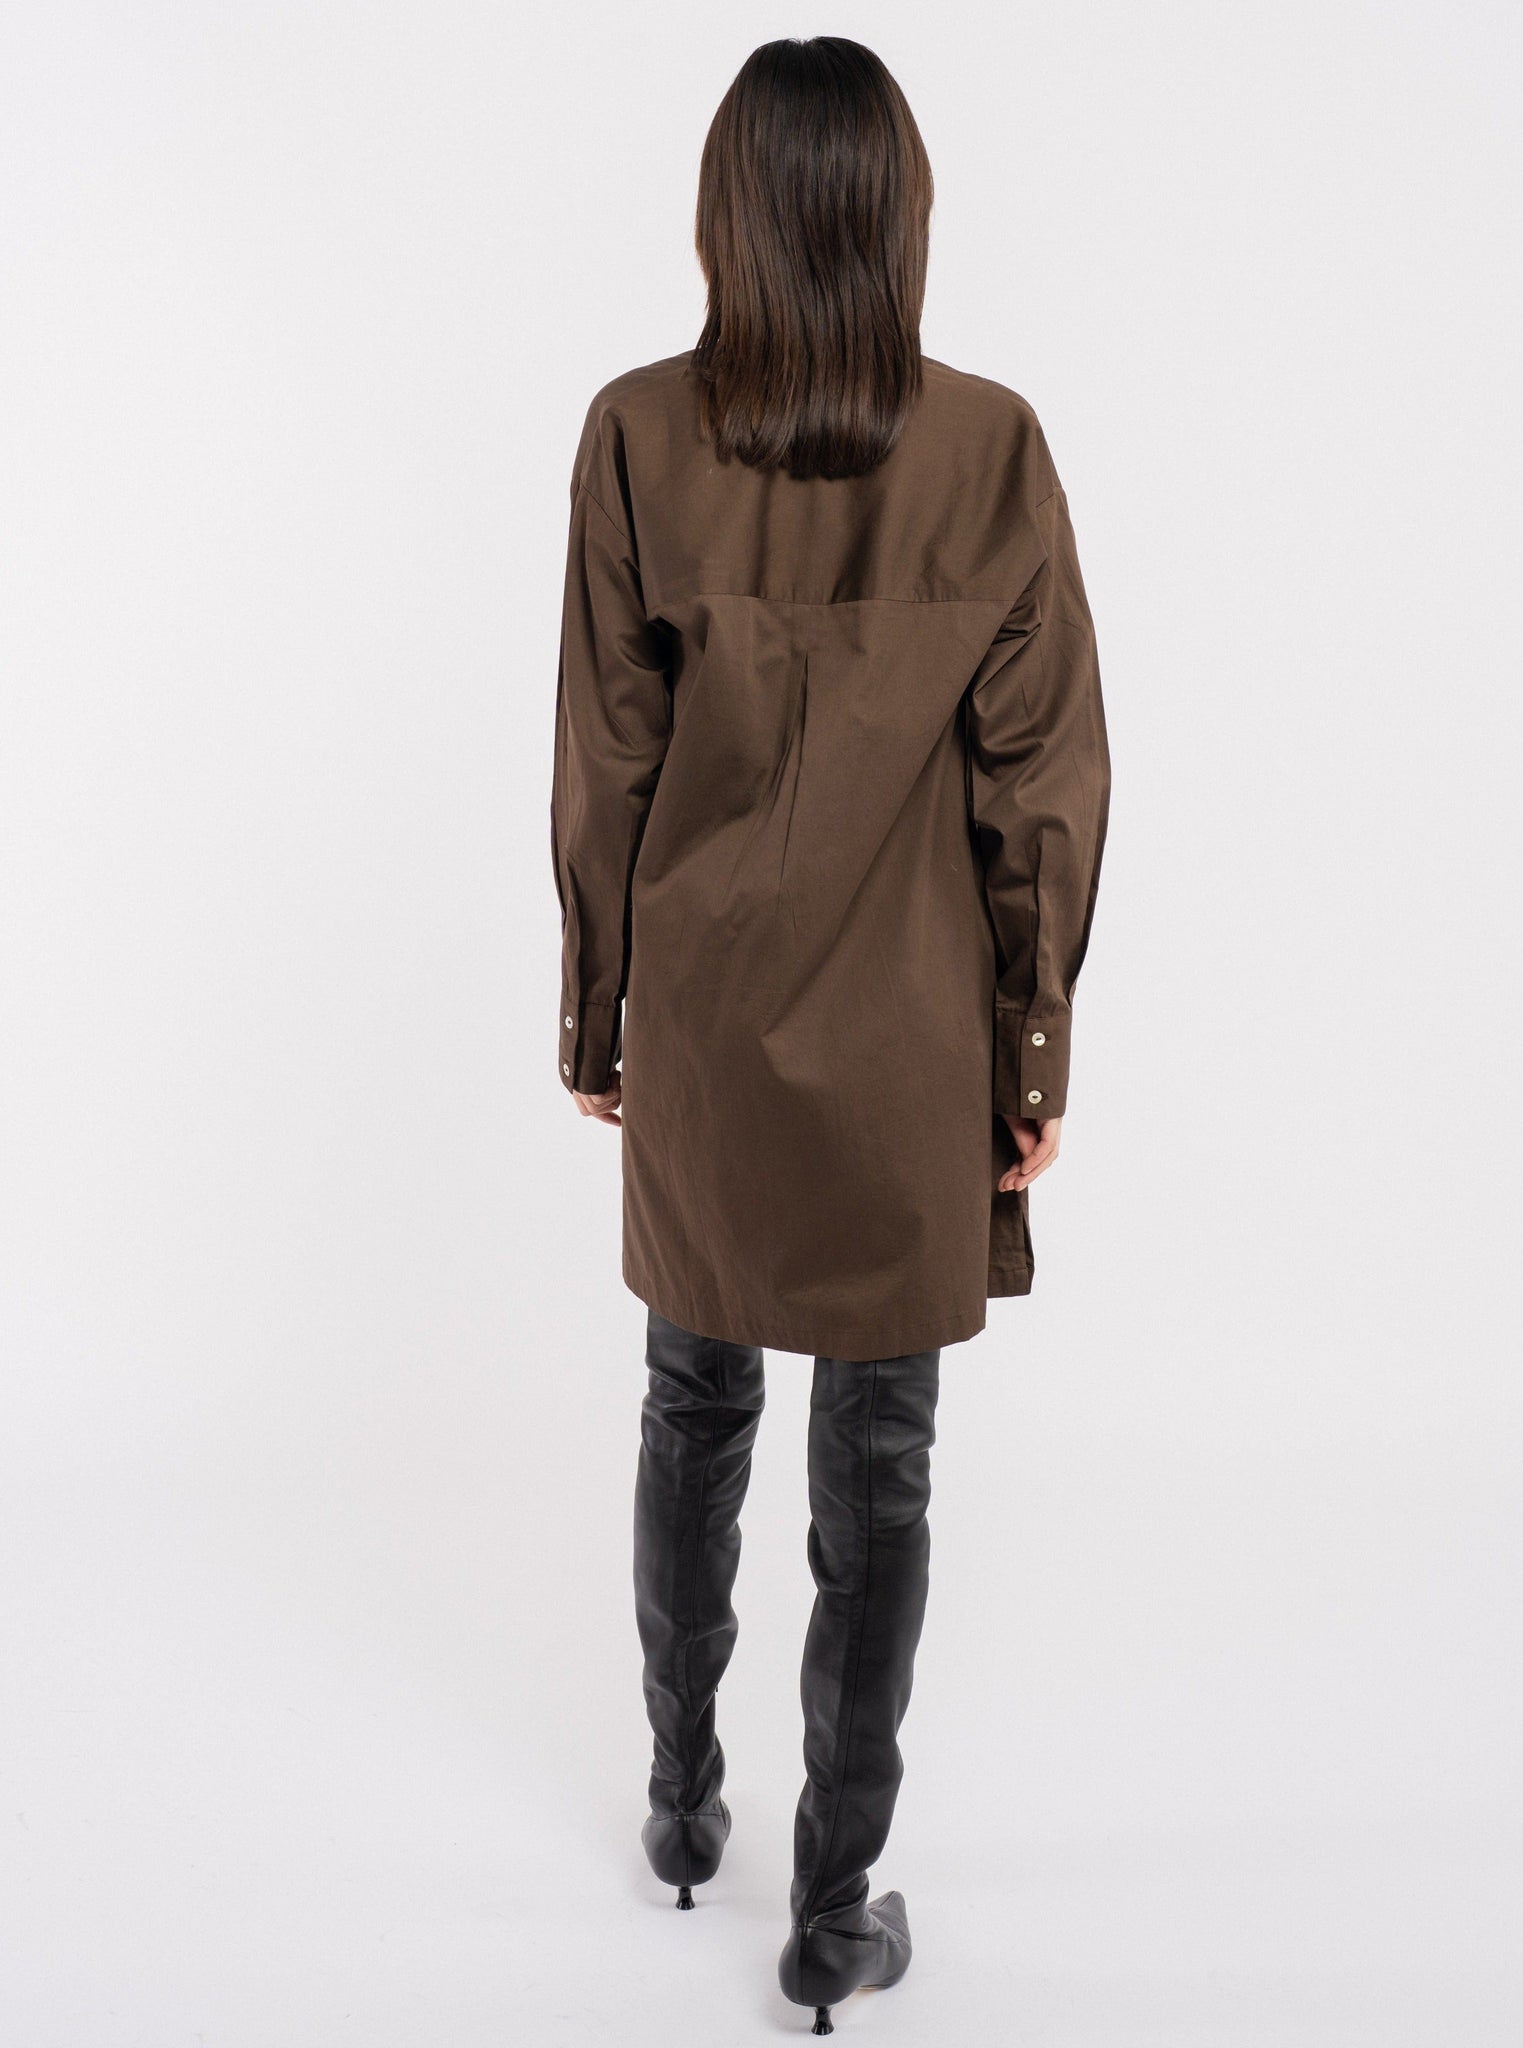 The back view of a woman wearing a Modern Tunic Dress - Basalt Brown and thigh high boots.